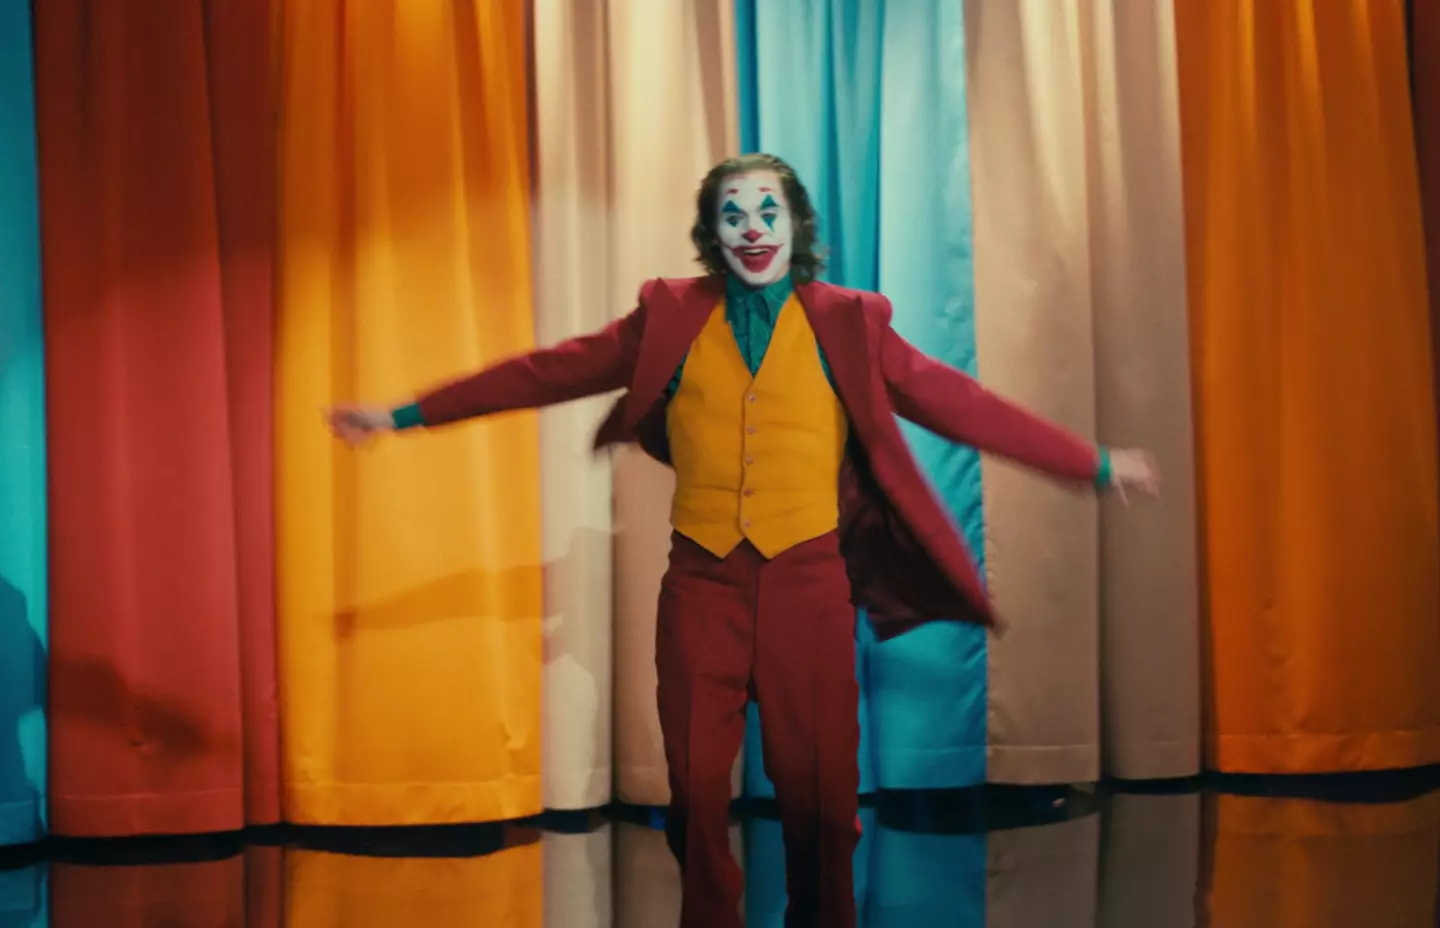 Phoenix viewed the weight loss and its subsequent effect on his movement an 'important part' of portraying the Joker's character.